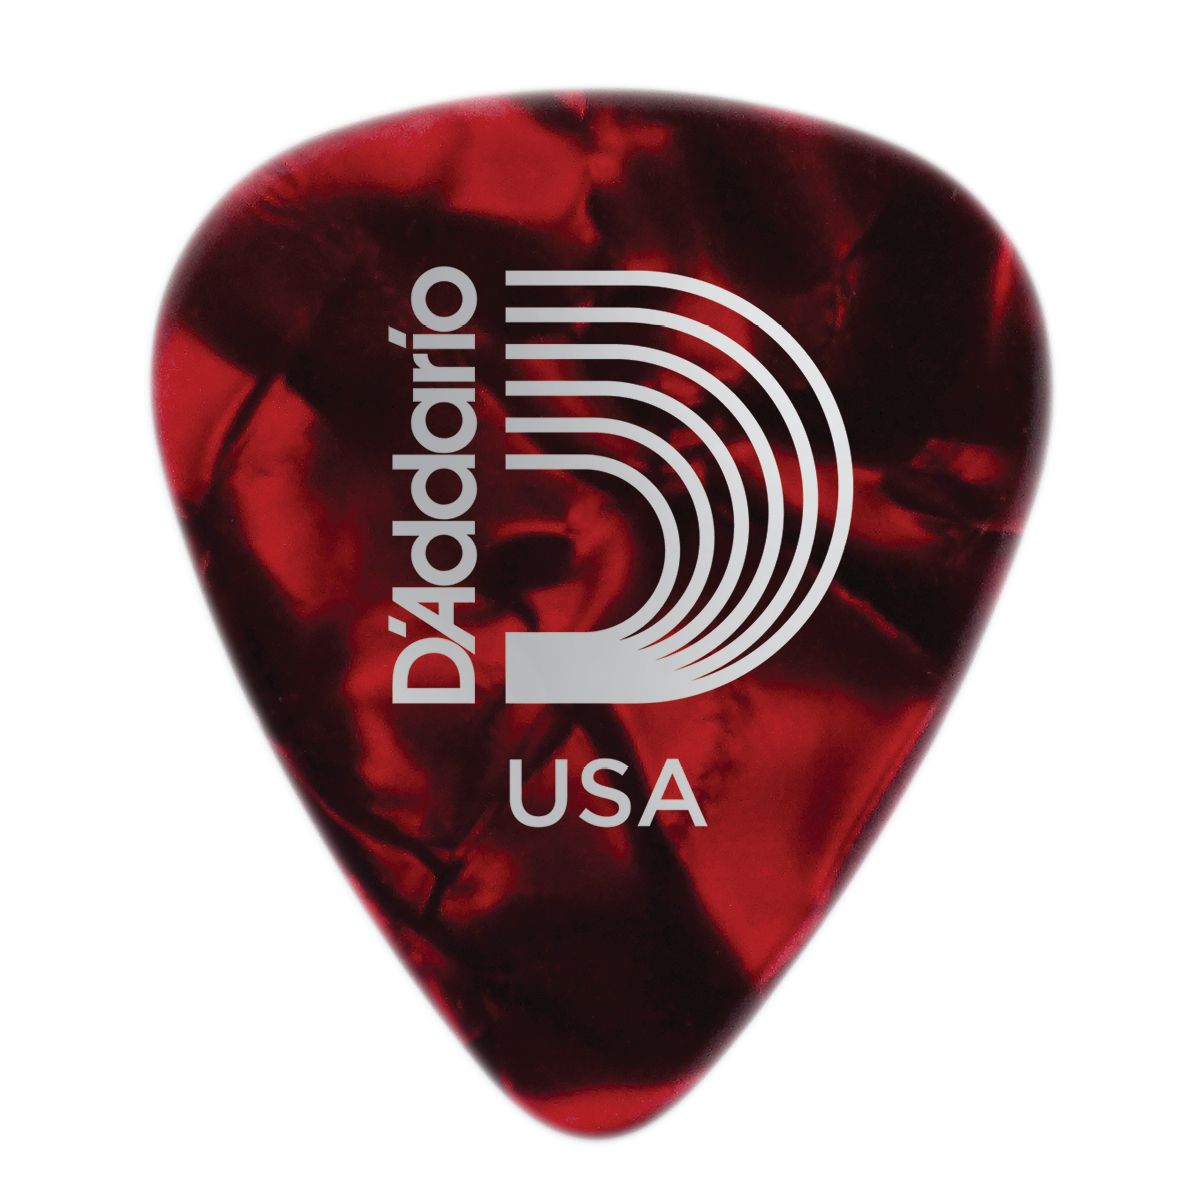 D'Addario Red Pearl Celluloid Guitar Pick, Extra Heavy